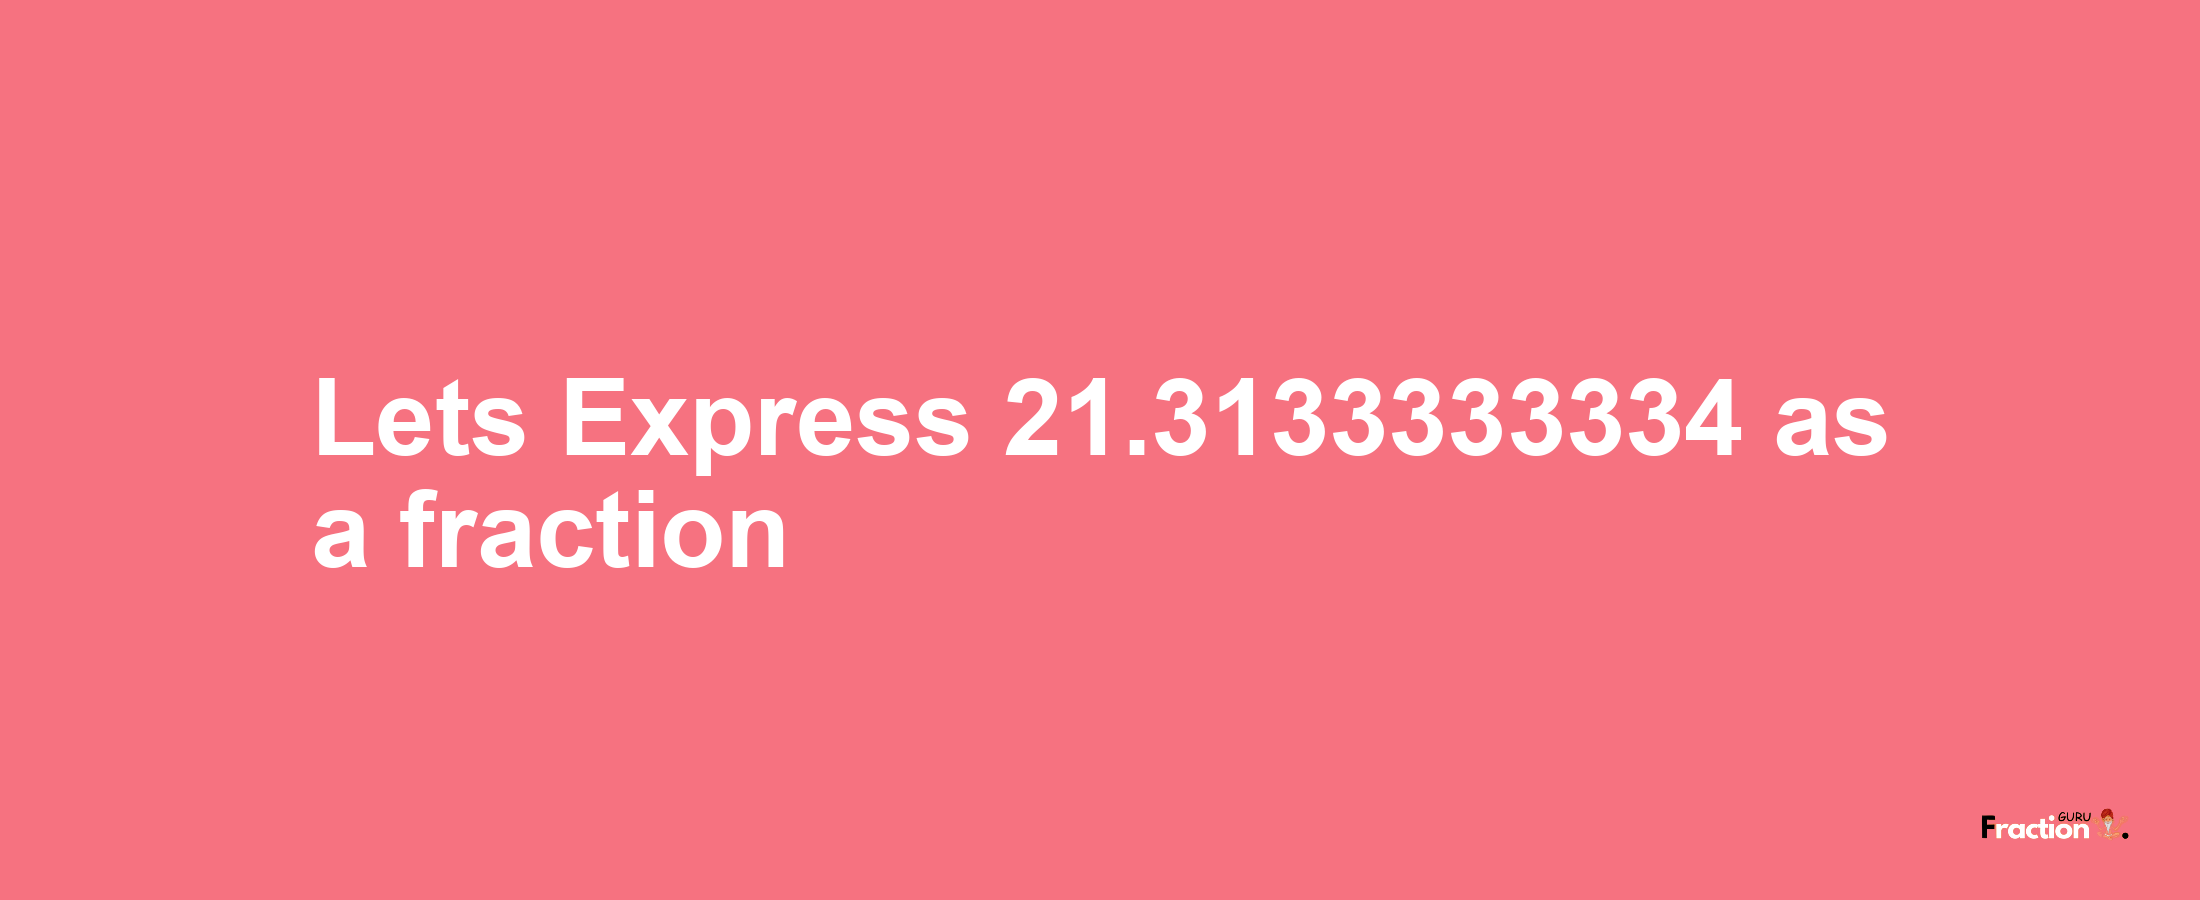 Lets Express 21.3133333334 as afraction